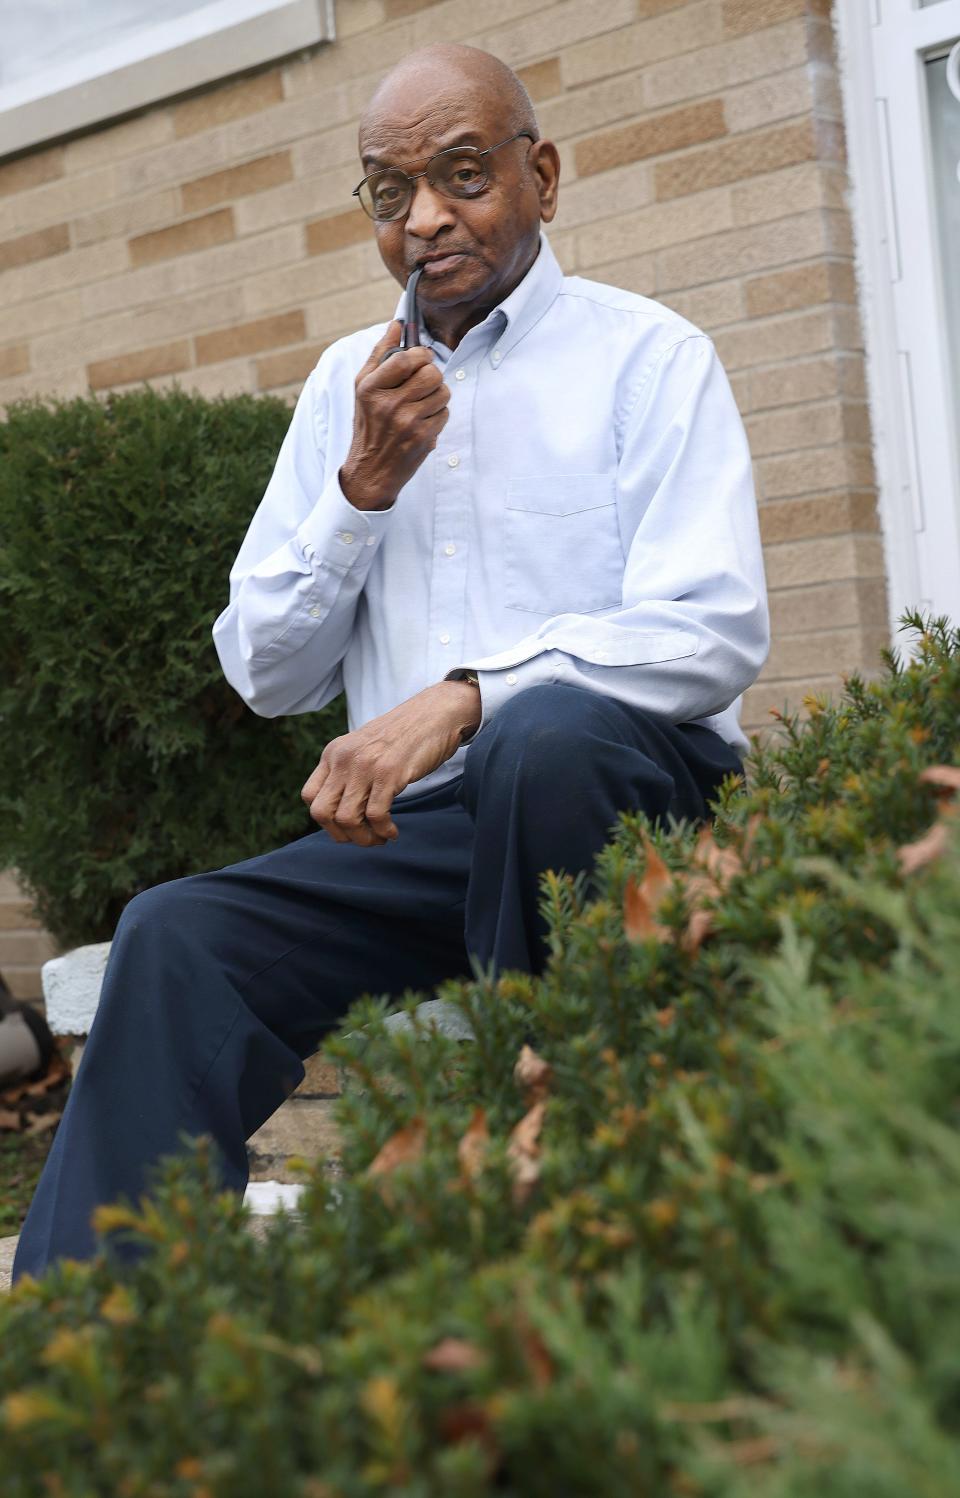 Henry Mack, 83, has been named one of The Canton Repository's 2021 Unsung Heroes for his dedication to his Canton neighborhood.